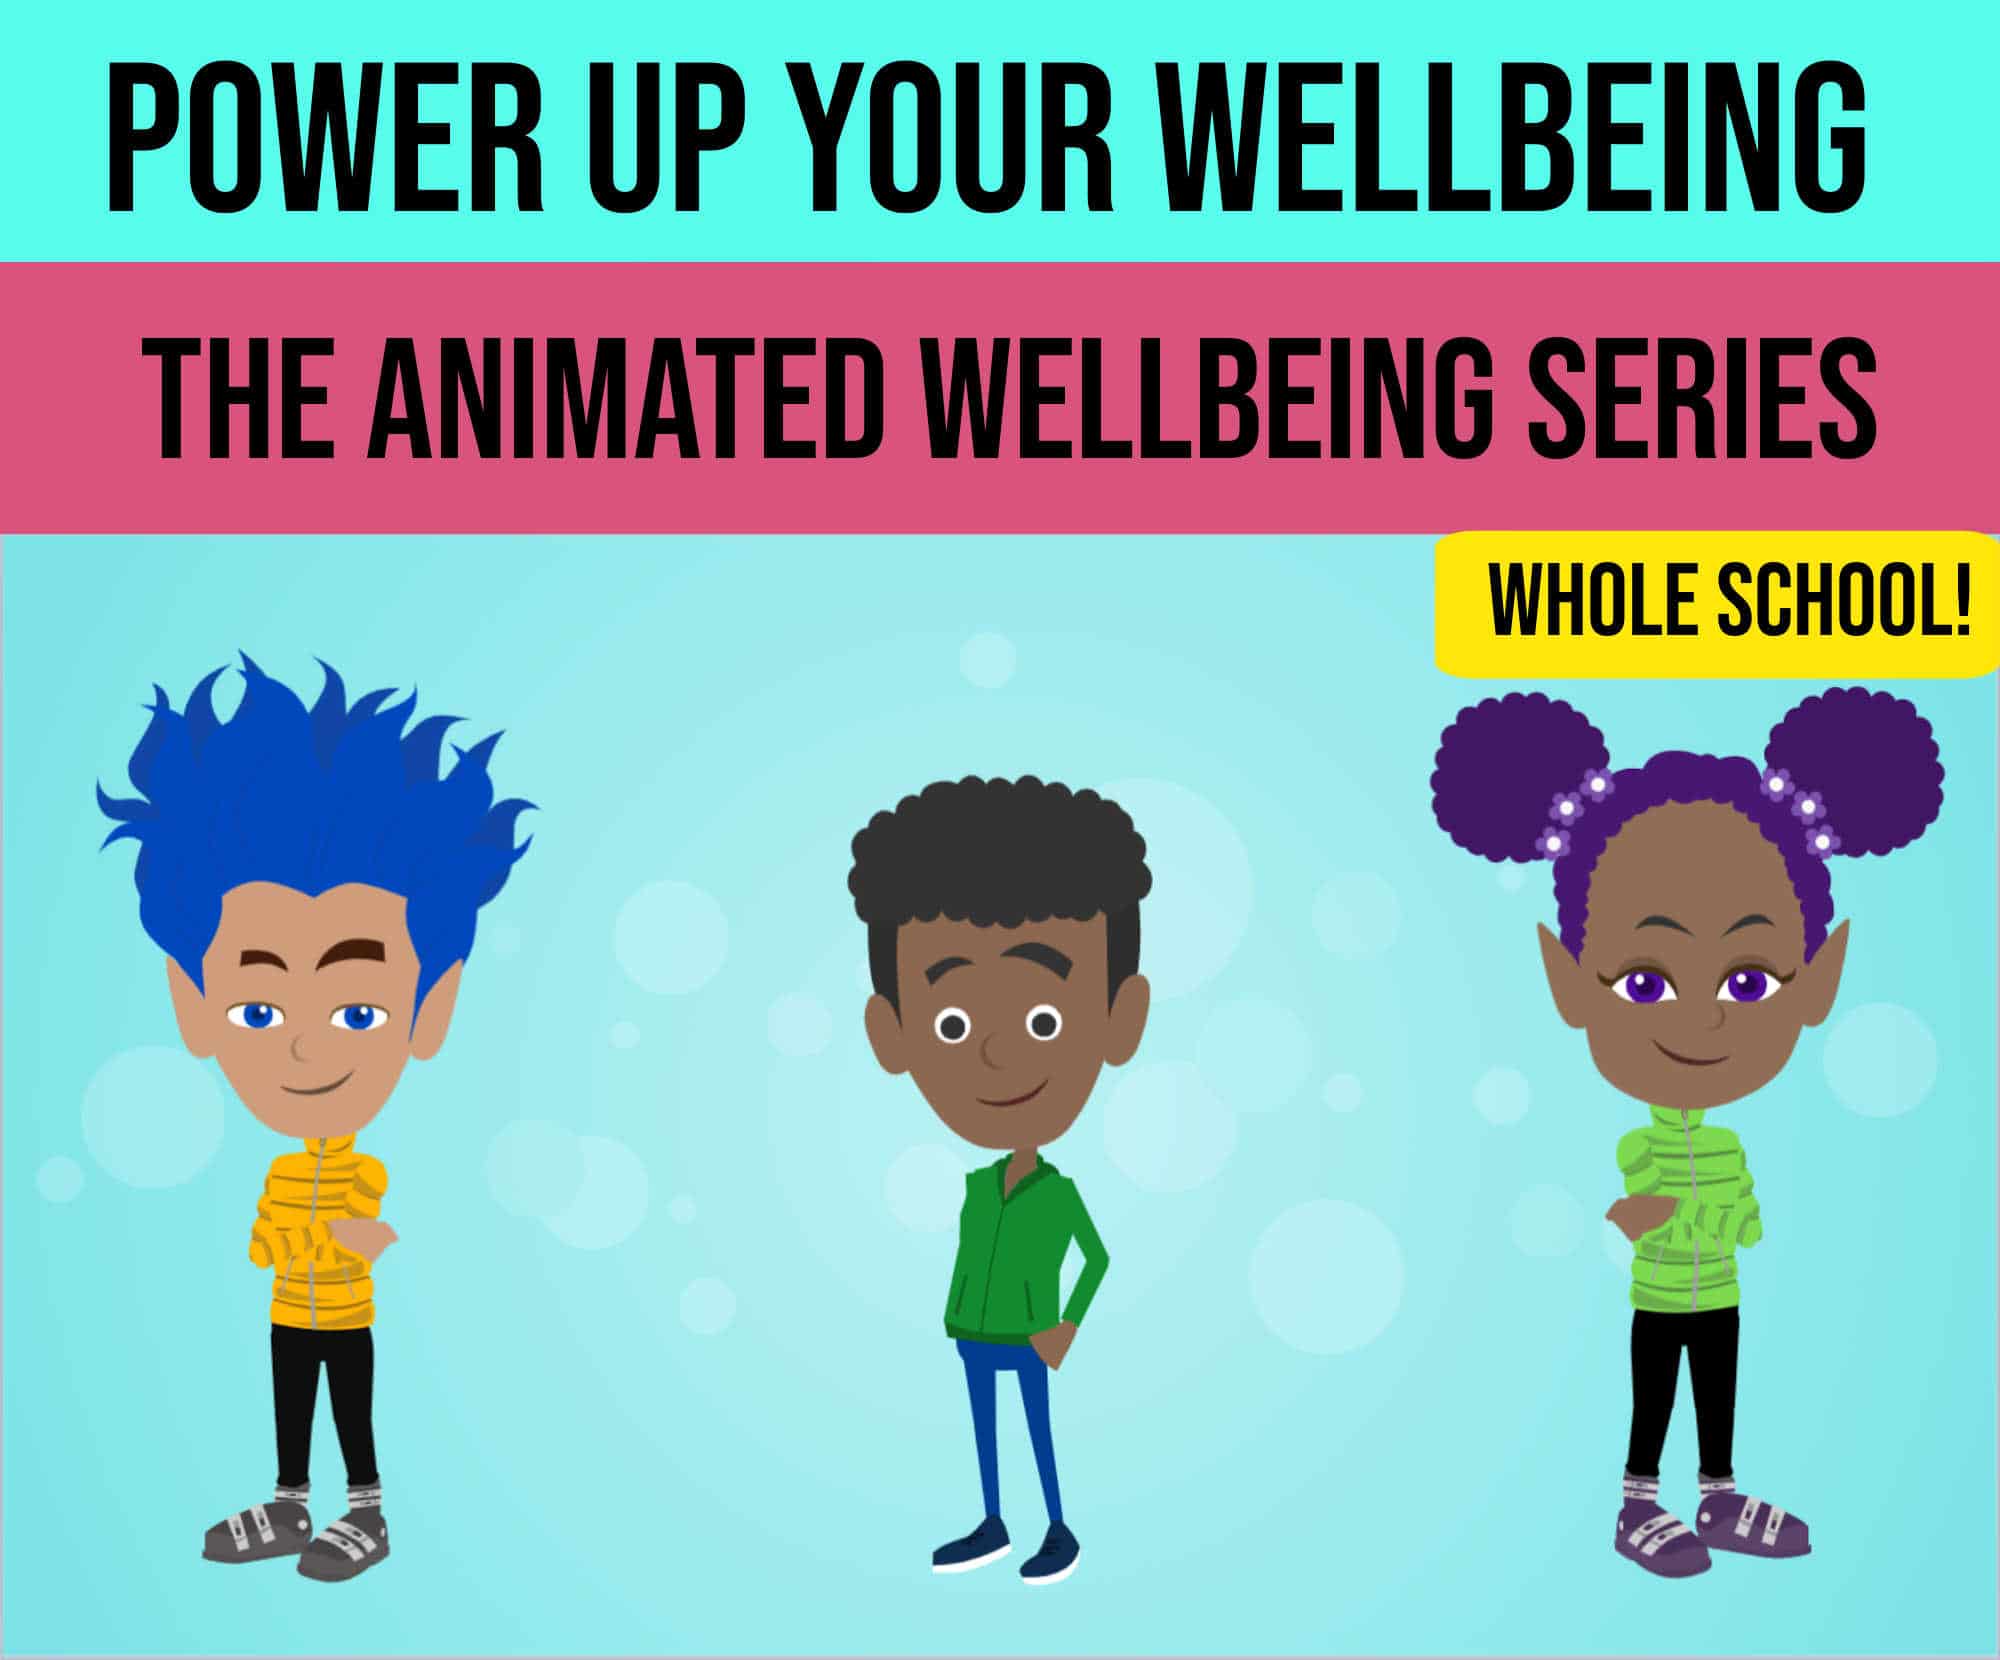 Wellbeing and mental health teaching resources